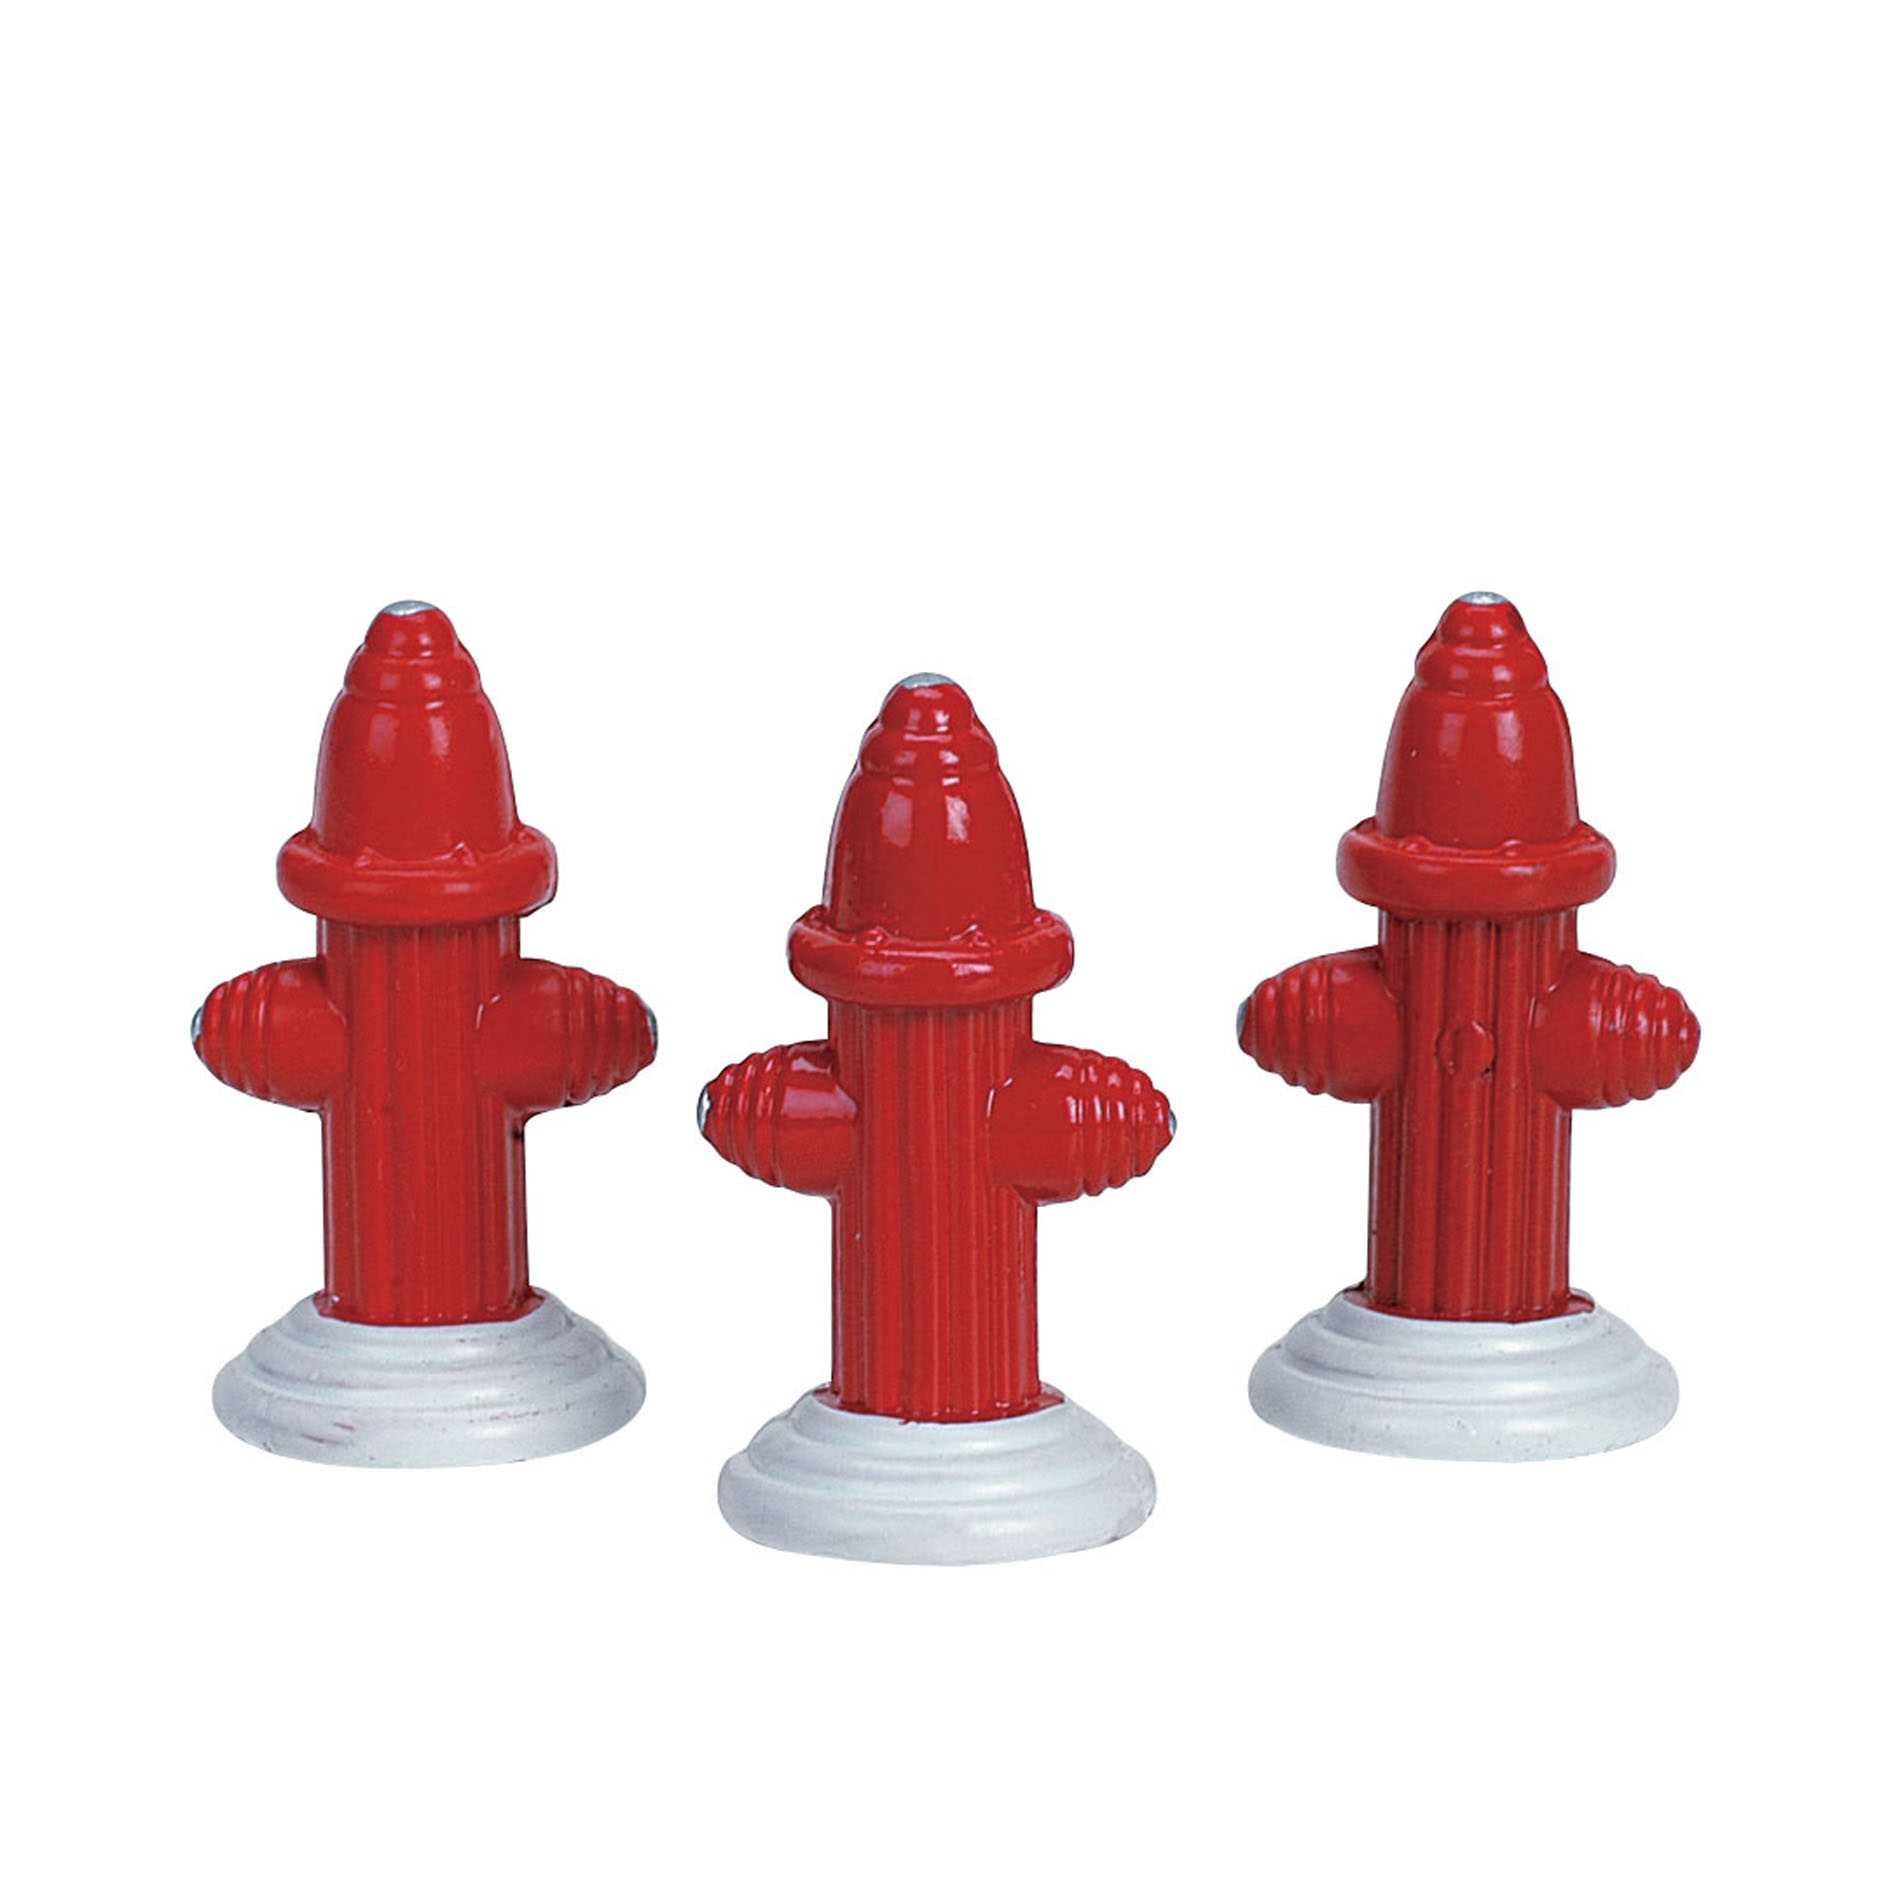 Christmas Village Accessory, Metal Fire Hydrant, 3 set